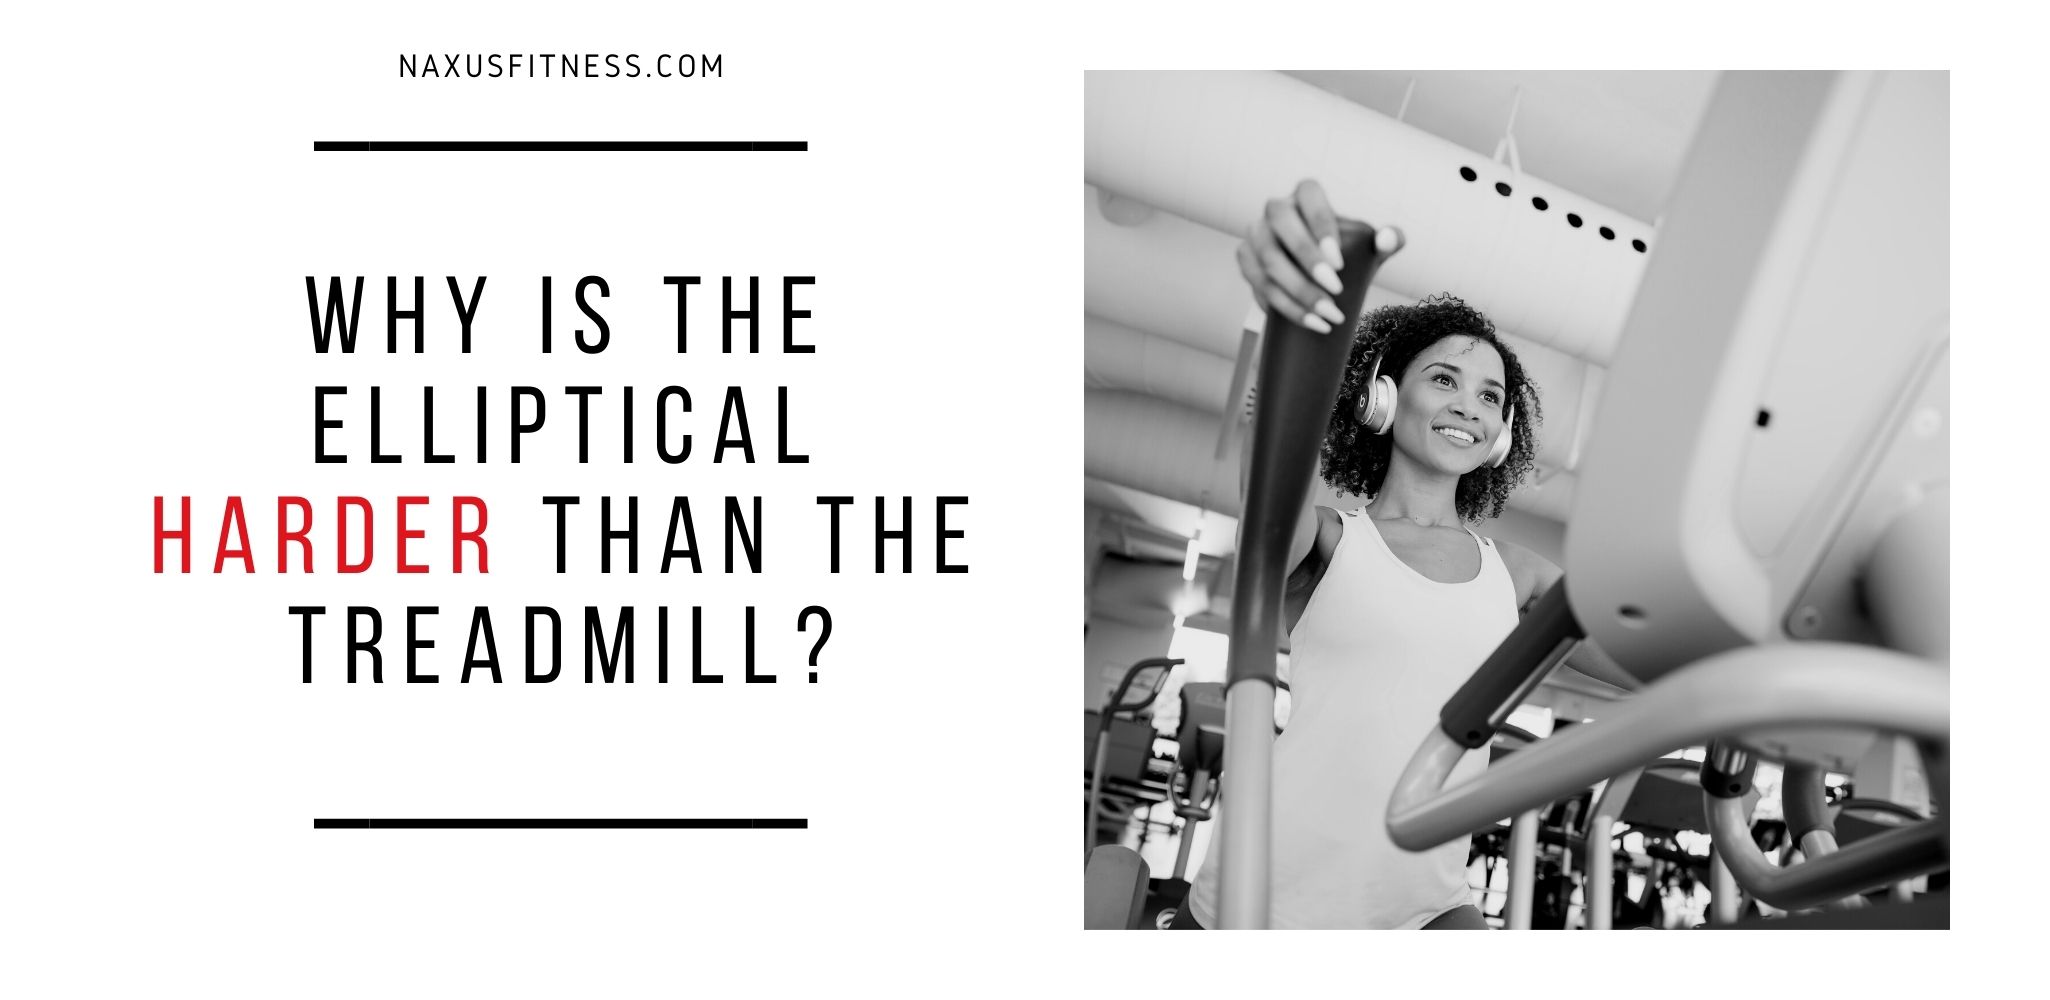 Why is the elliptical harder than the treadmill?